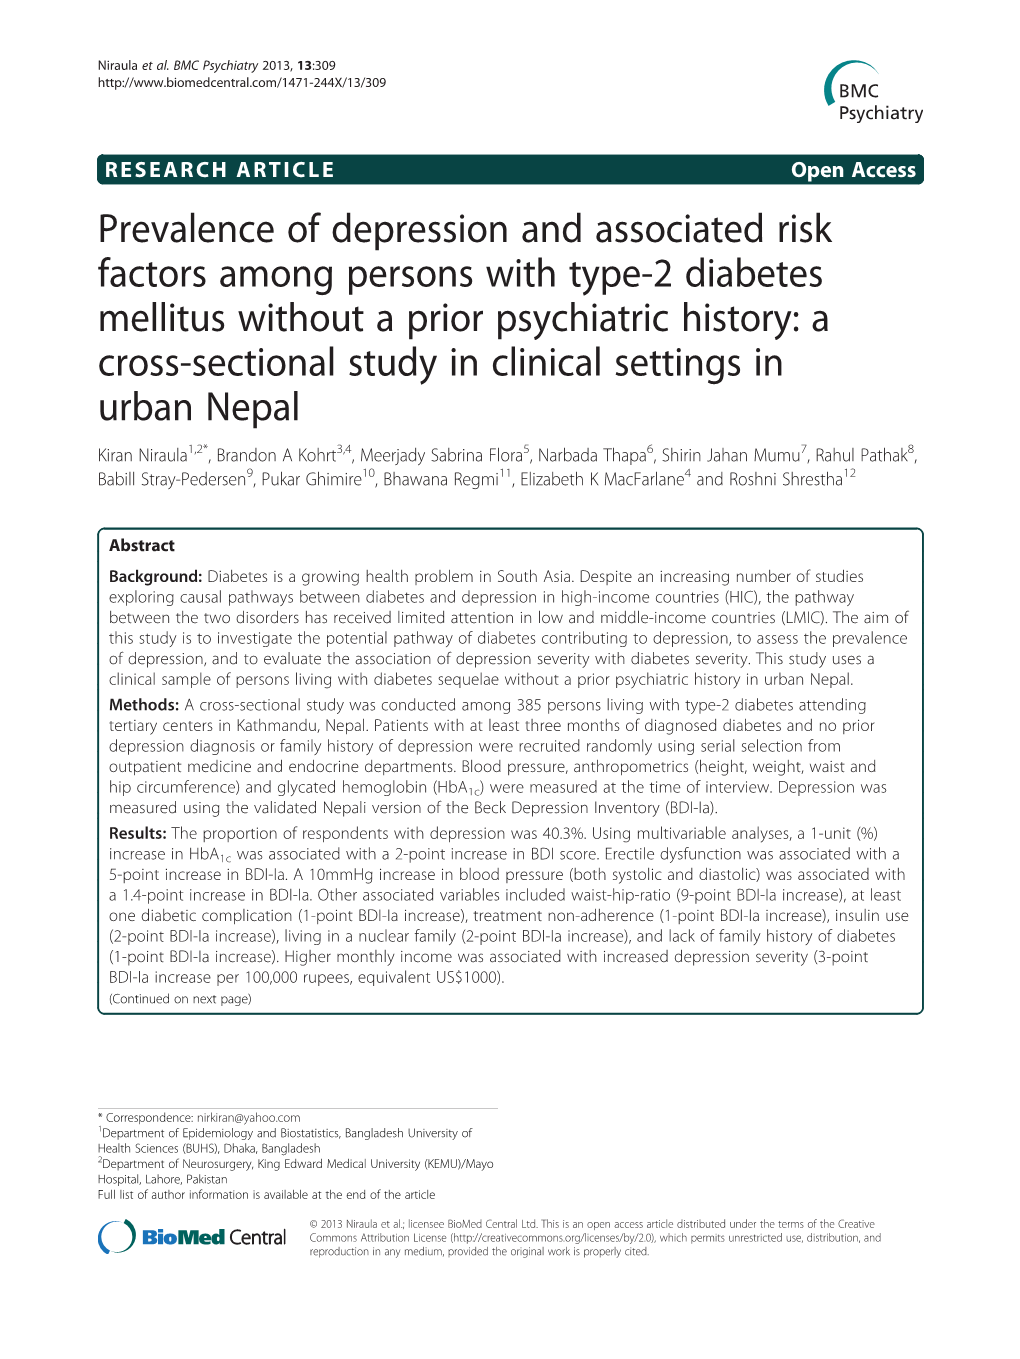 Prevalence of Depression and Associated Risk Factors Among Persons with Type-2 Diabetes Mellitus Without a Prior Psychiatric